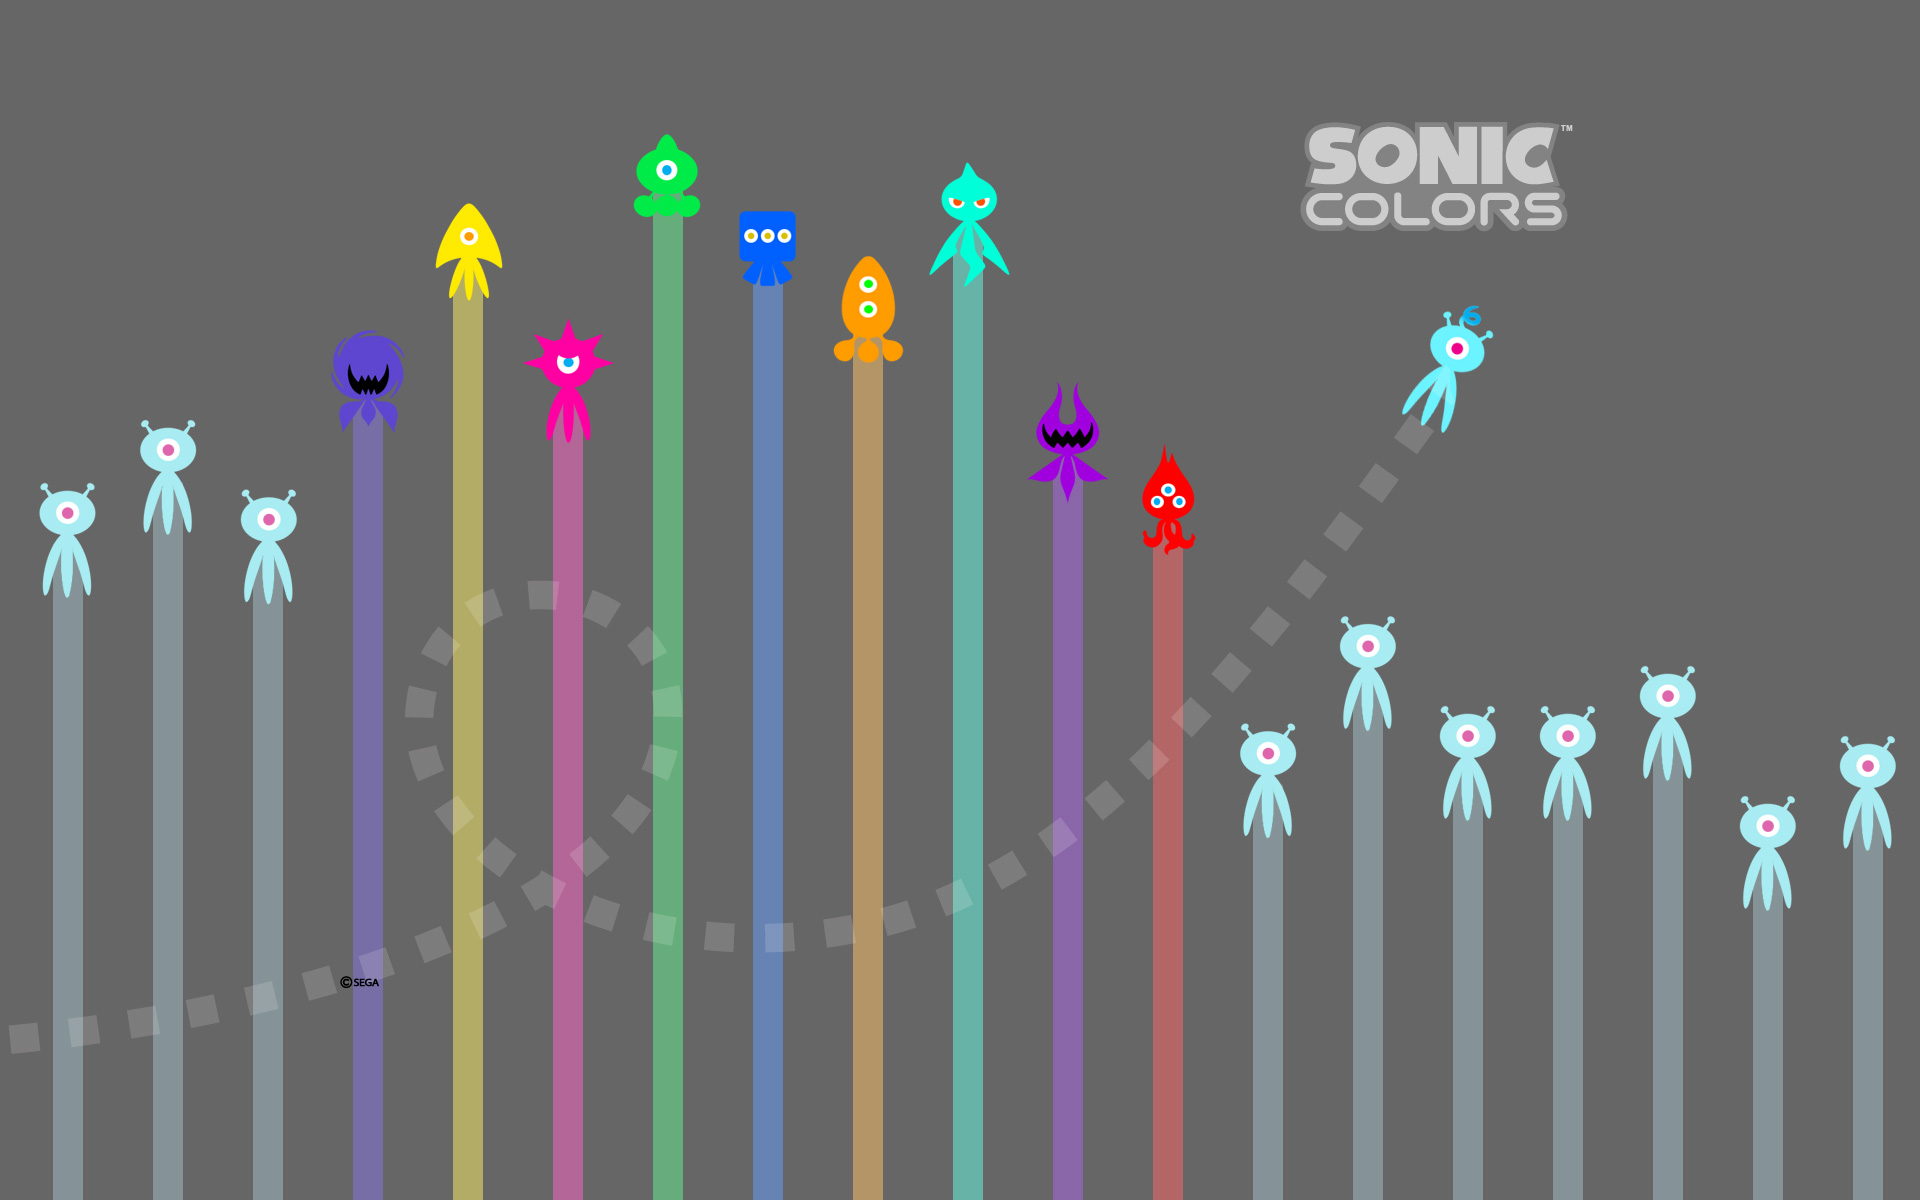 video game, sonic colors, sonic